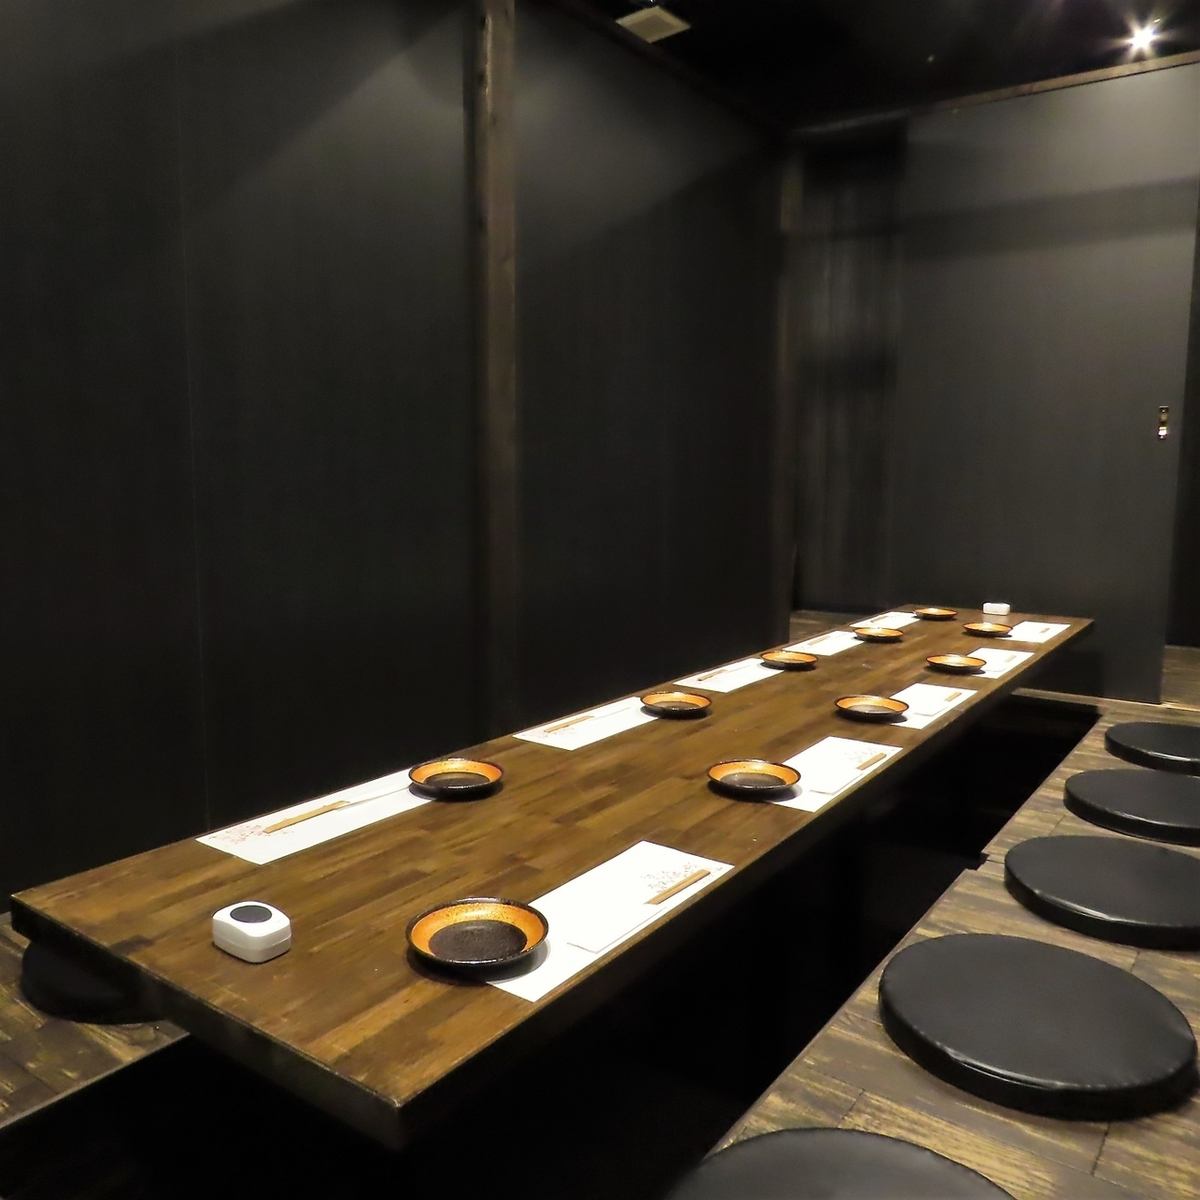 All seats are completely private rooms! You can relax and relax without worrying about being seen by others.